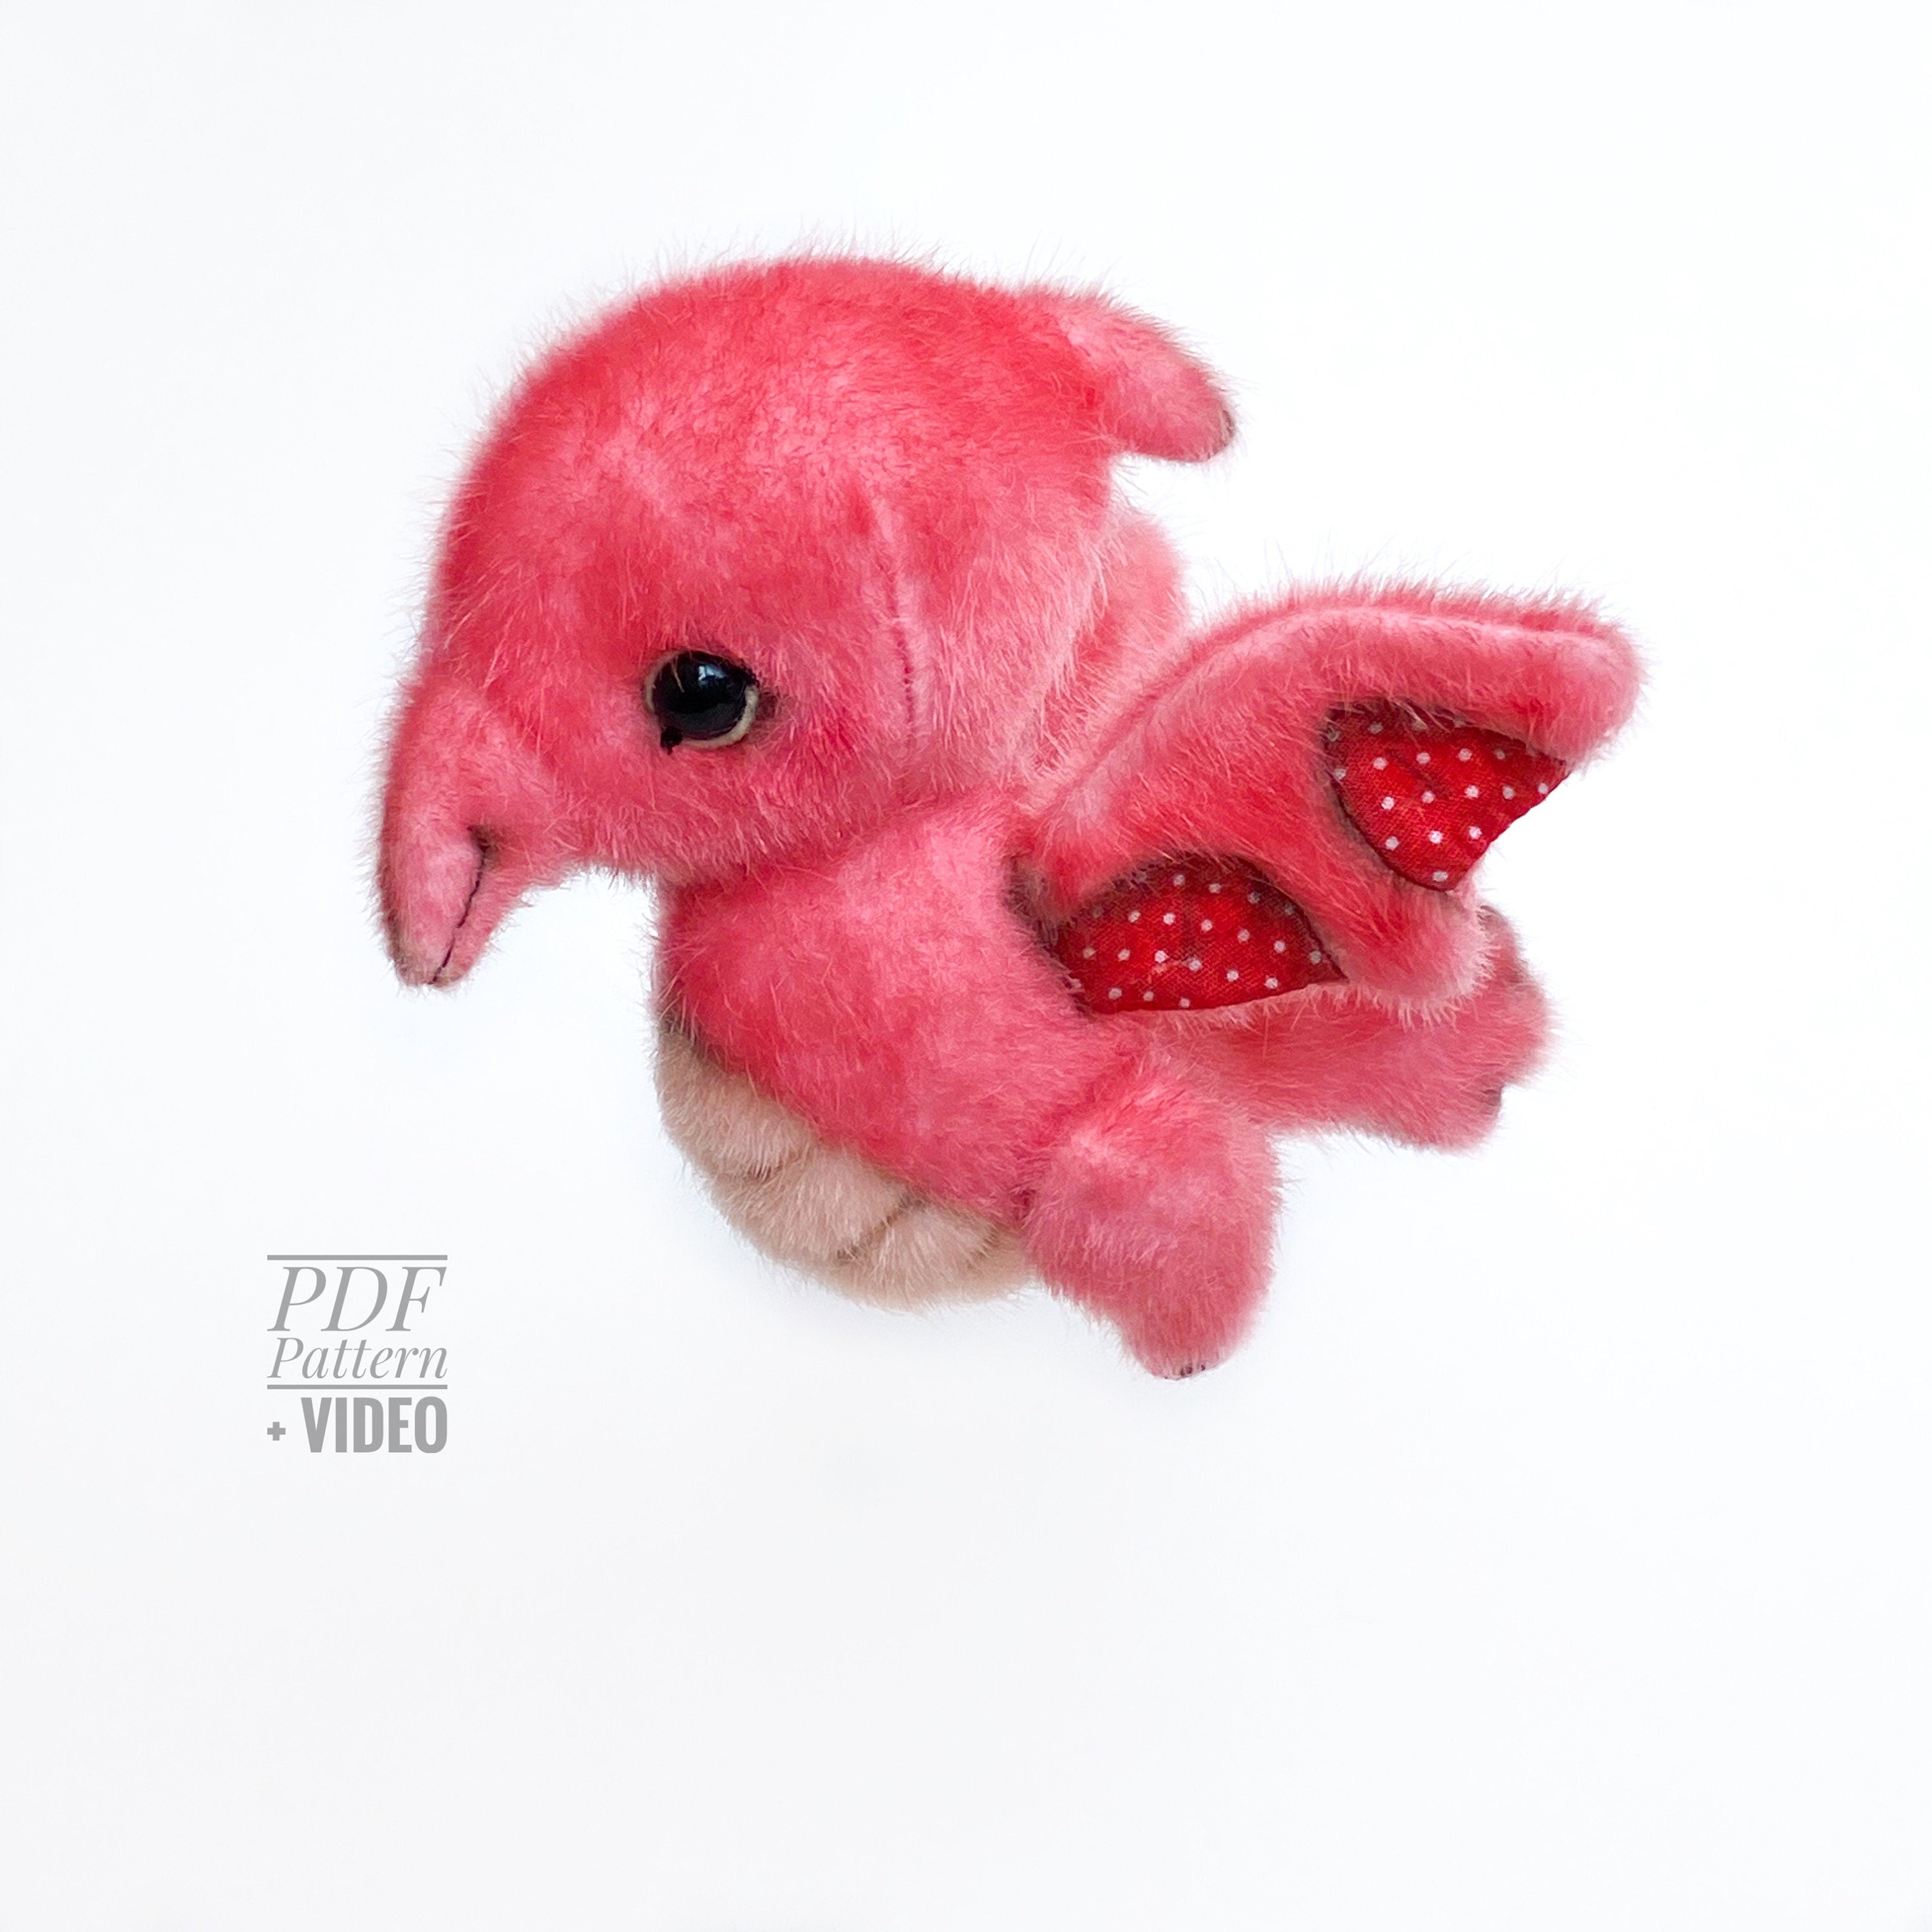 4 in 1 PATTERN Dinosaurs Dino Stegosaurus Triceratops Pterodactyl Brontosaurs PDF sewing patterns Video tutorial DIY stuffed toy easy to sew